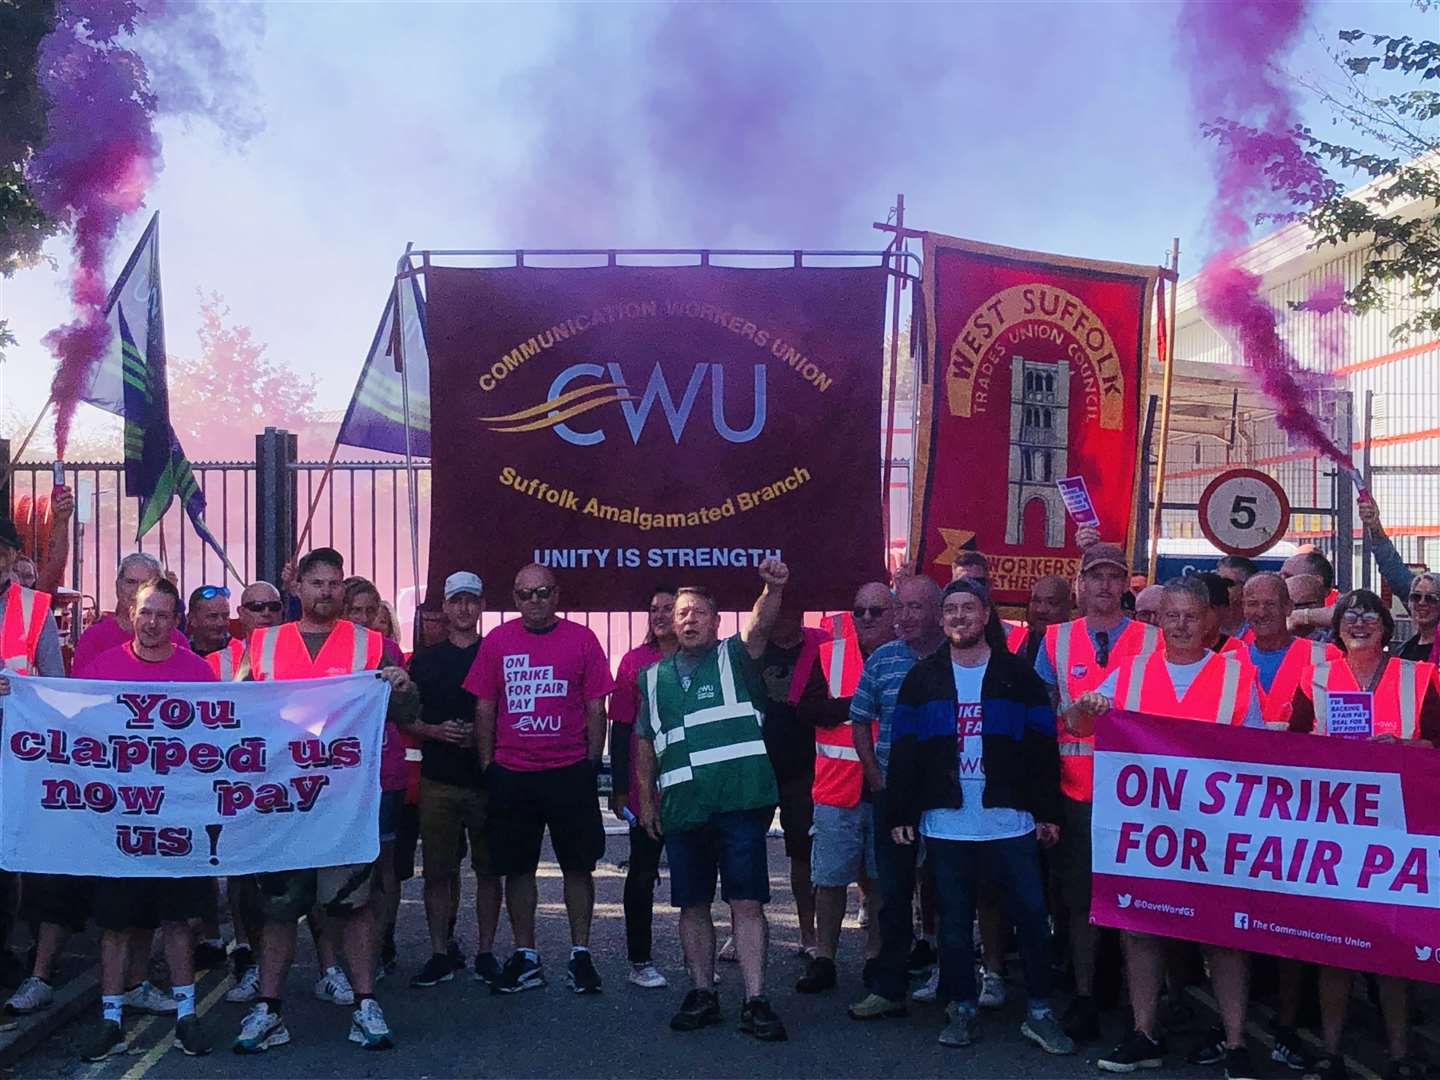 Royal Mail workers have gone on strike